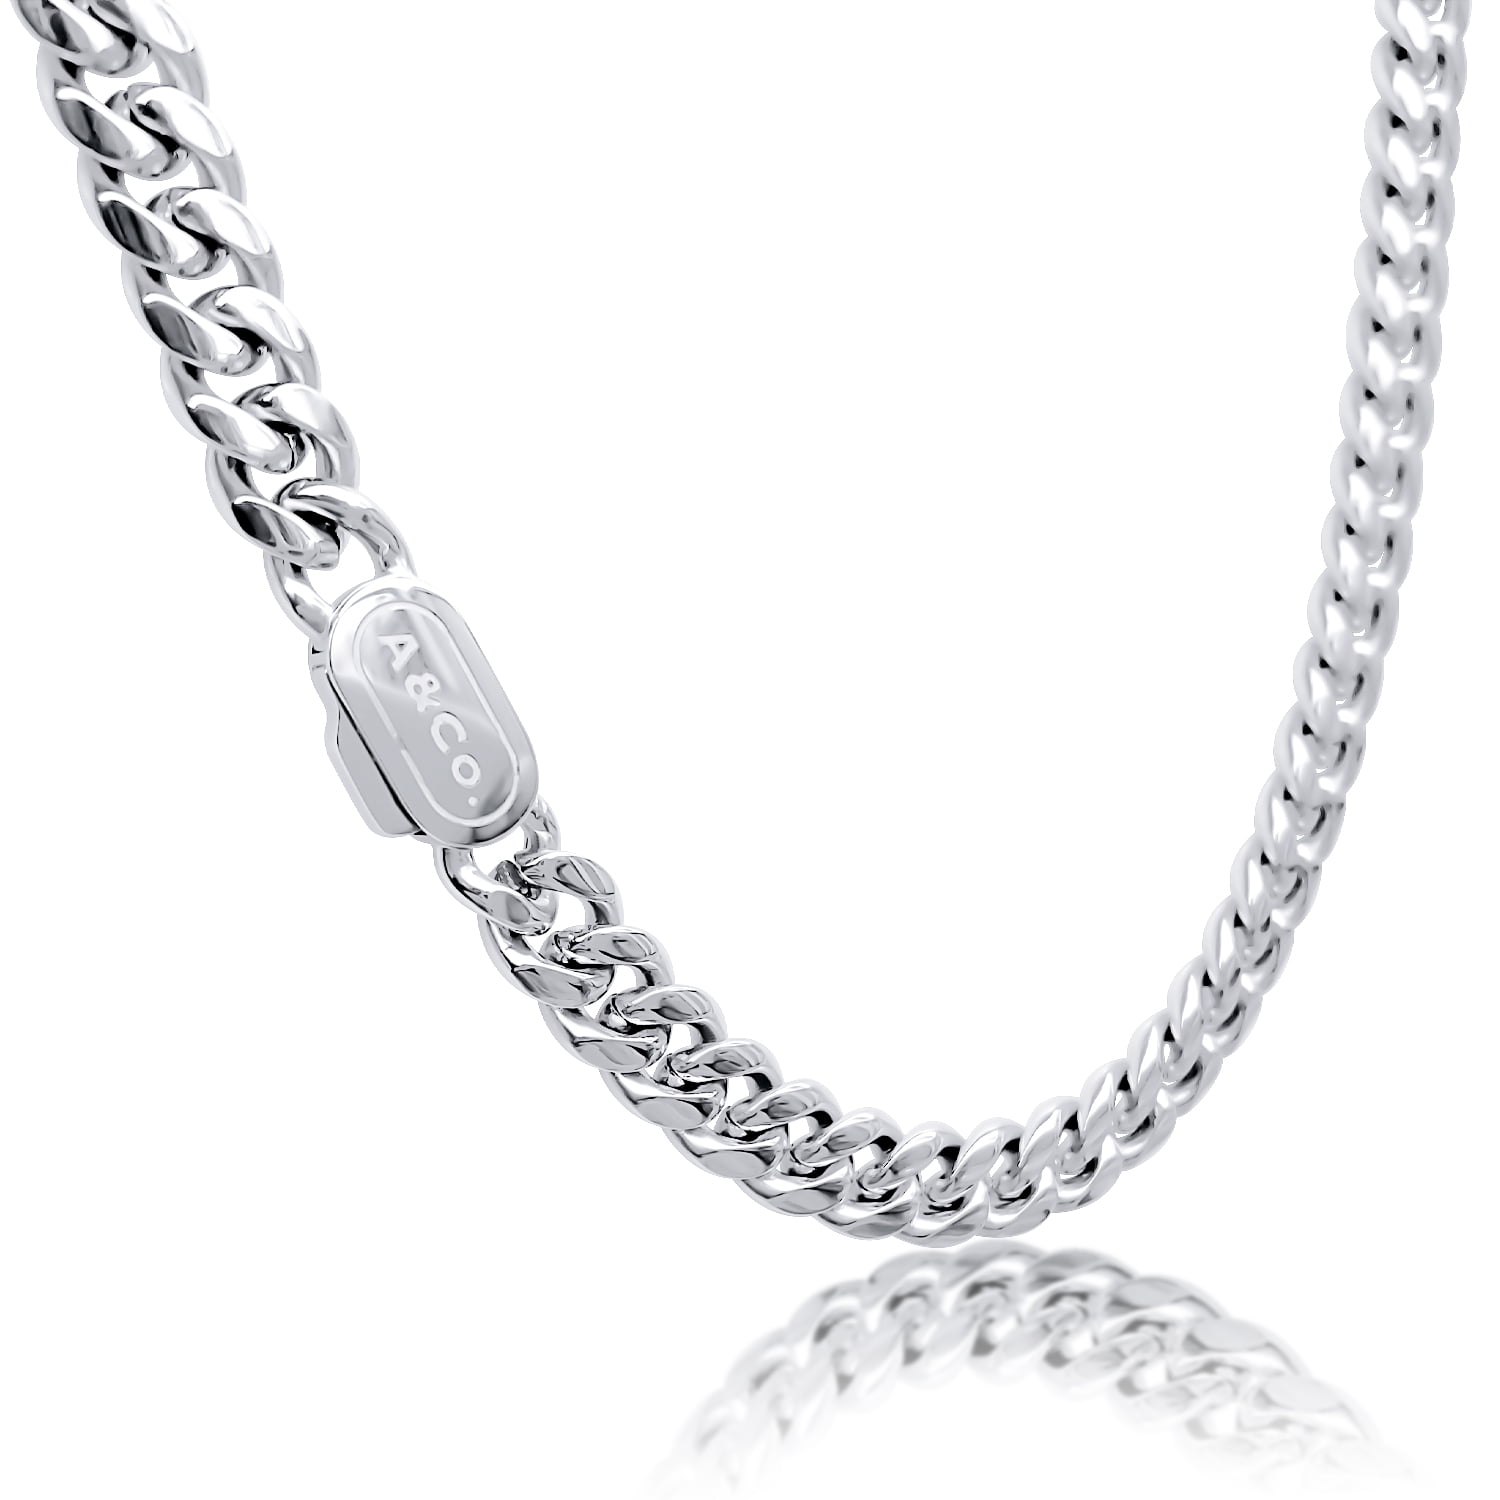 Solid 925 Sterling Silver Men's Miami Cuban Link Chain Necklace 8mm Diamond  Cut